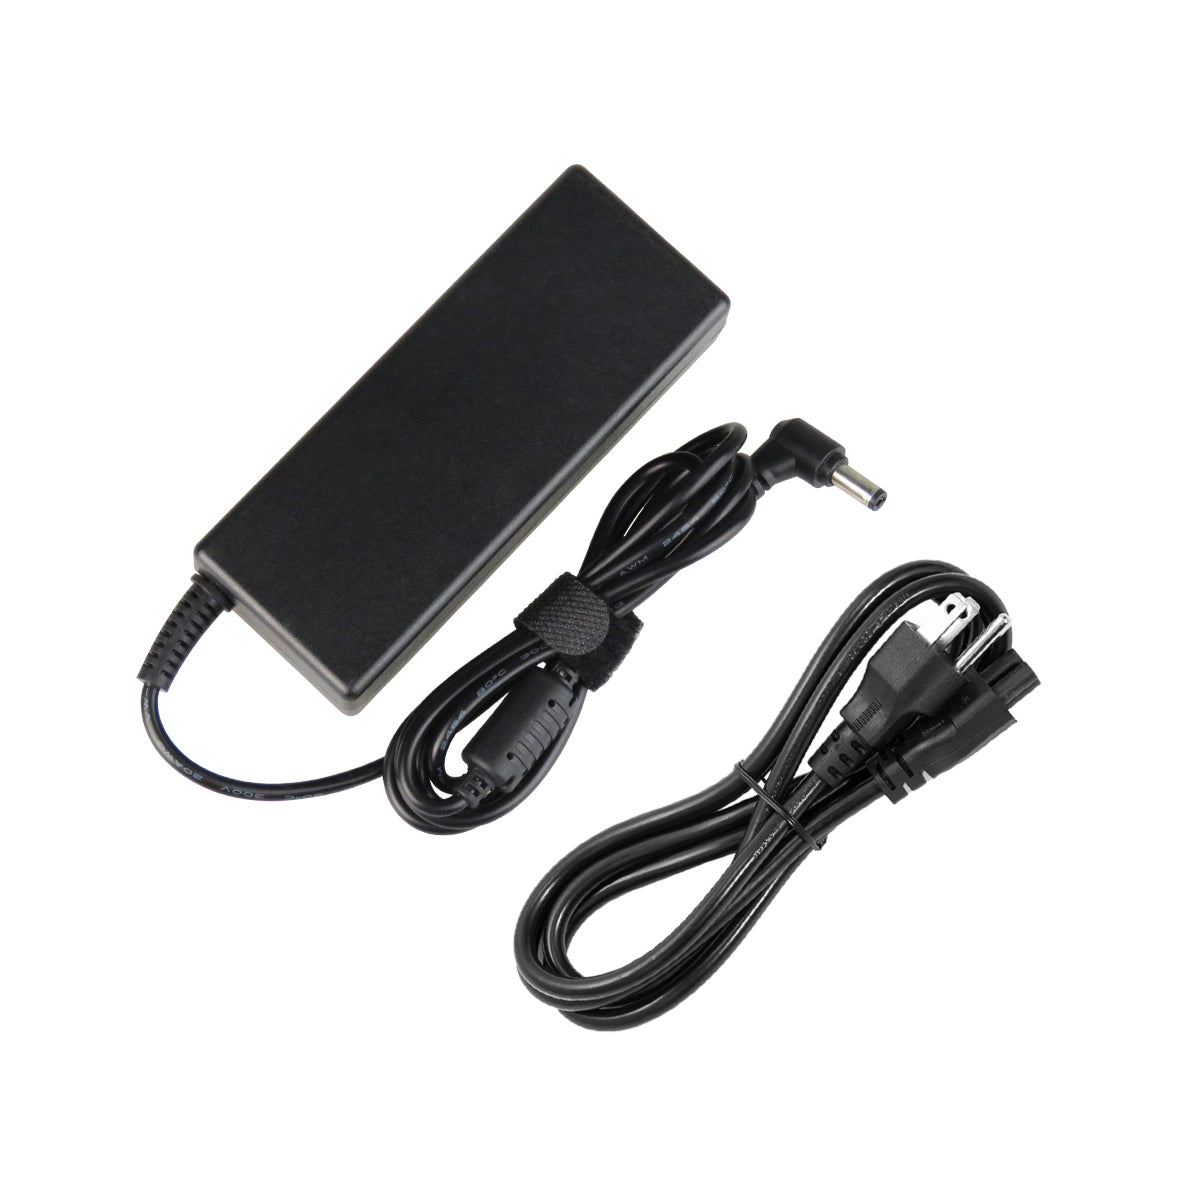 AC Adapter Charger for Toshiba Satellite c55t-a5218 Notebook.